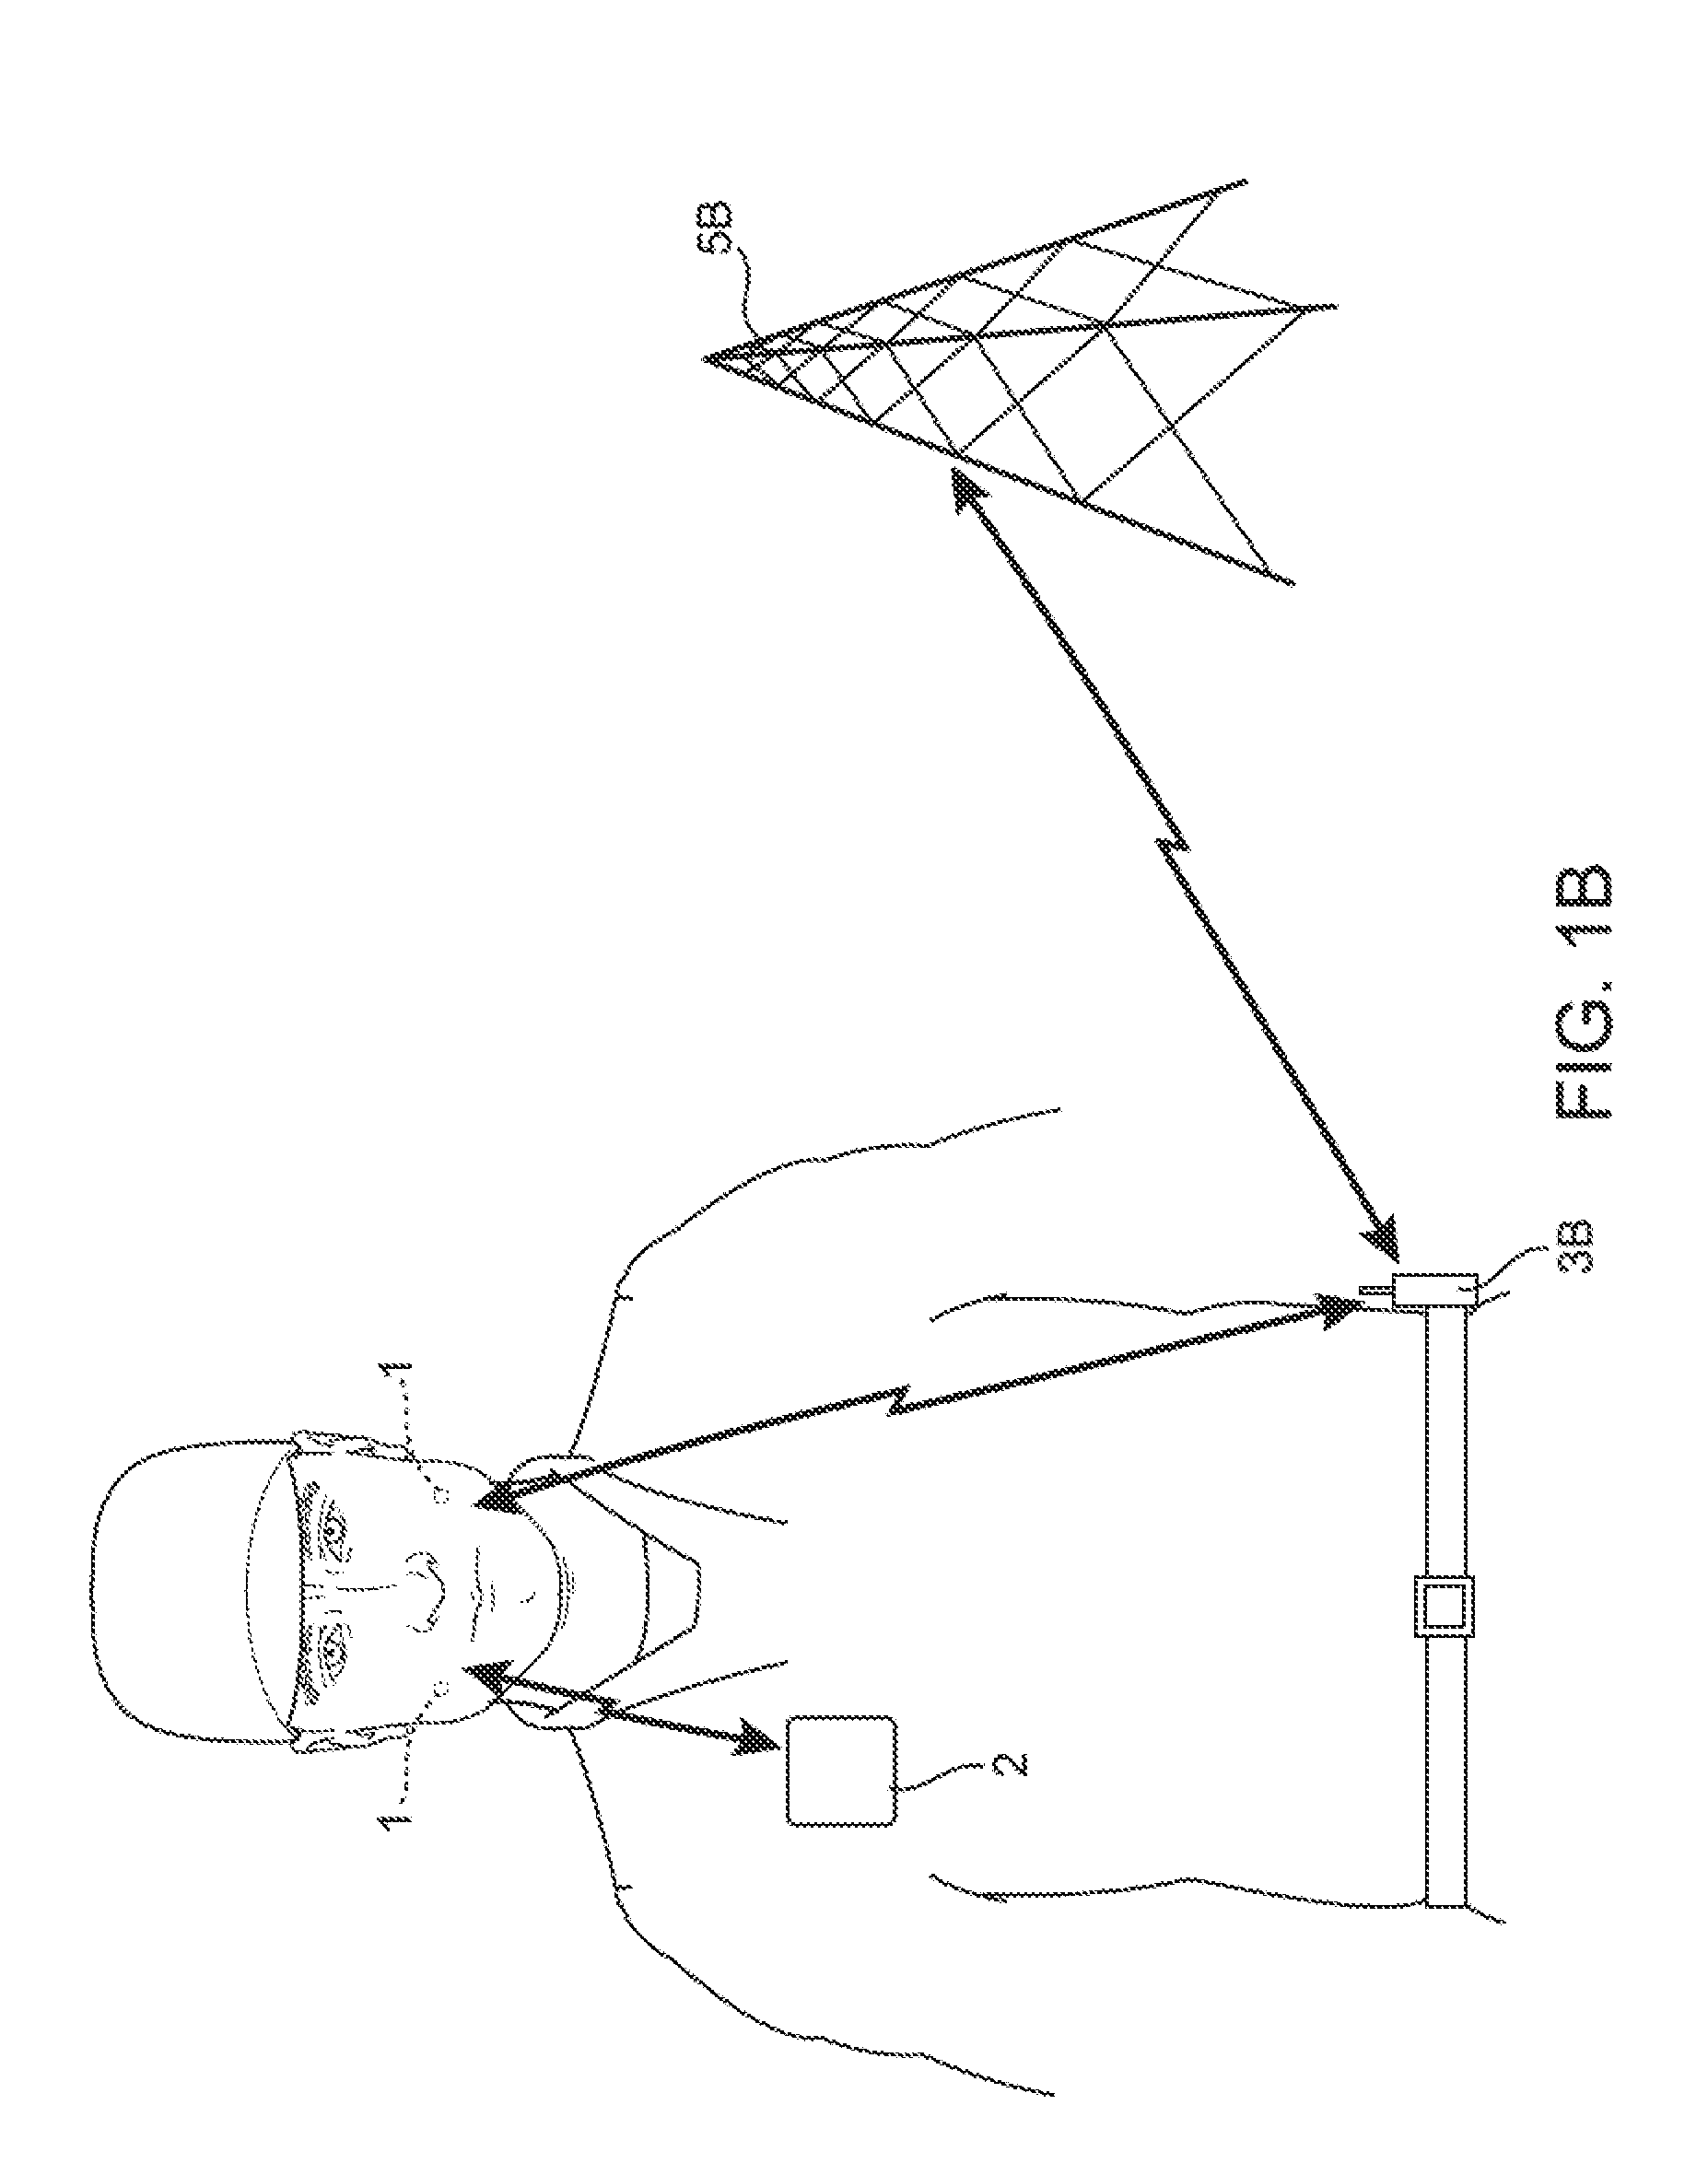 Systems and methods to provide communication and monitoring of user status